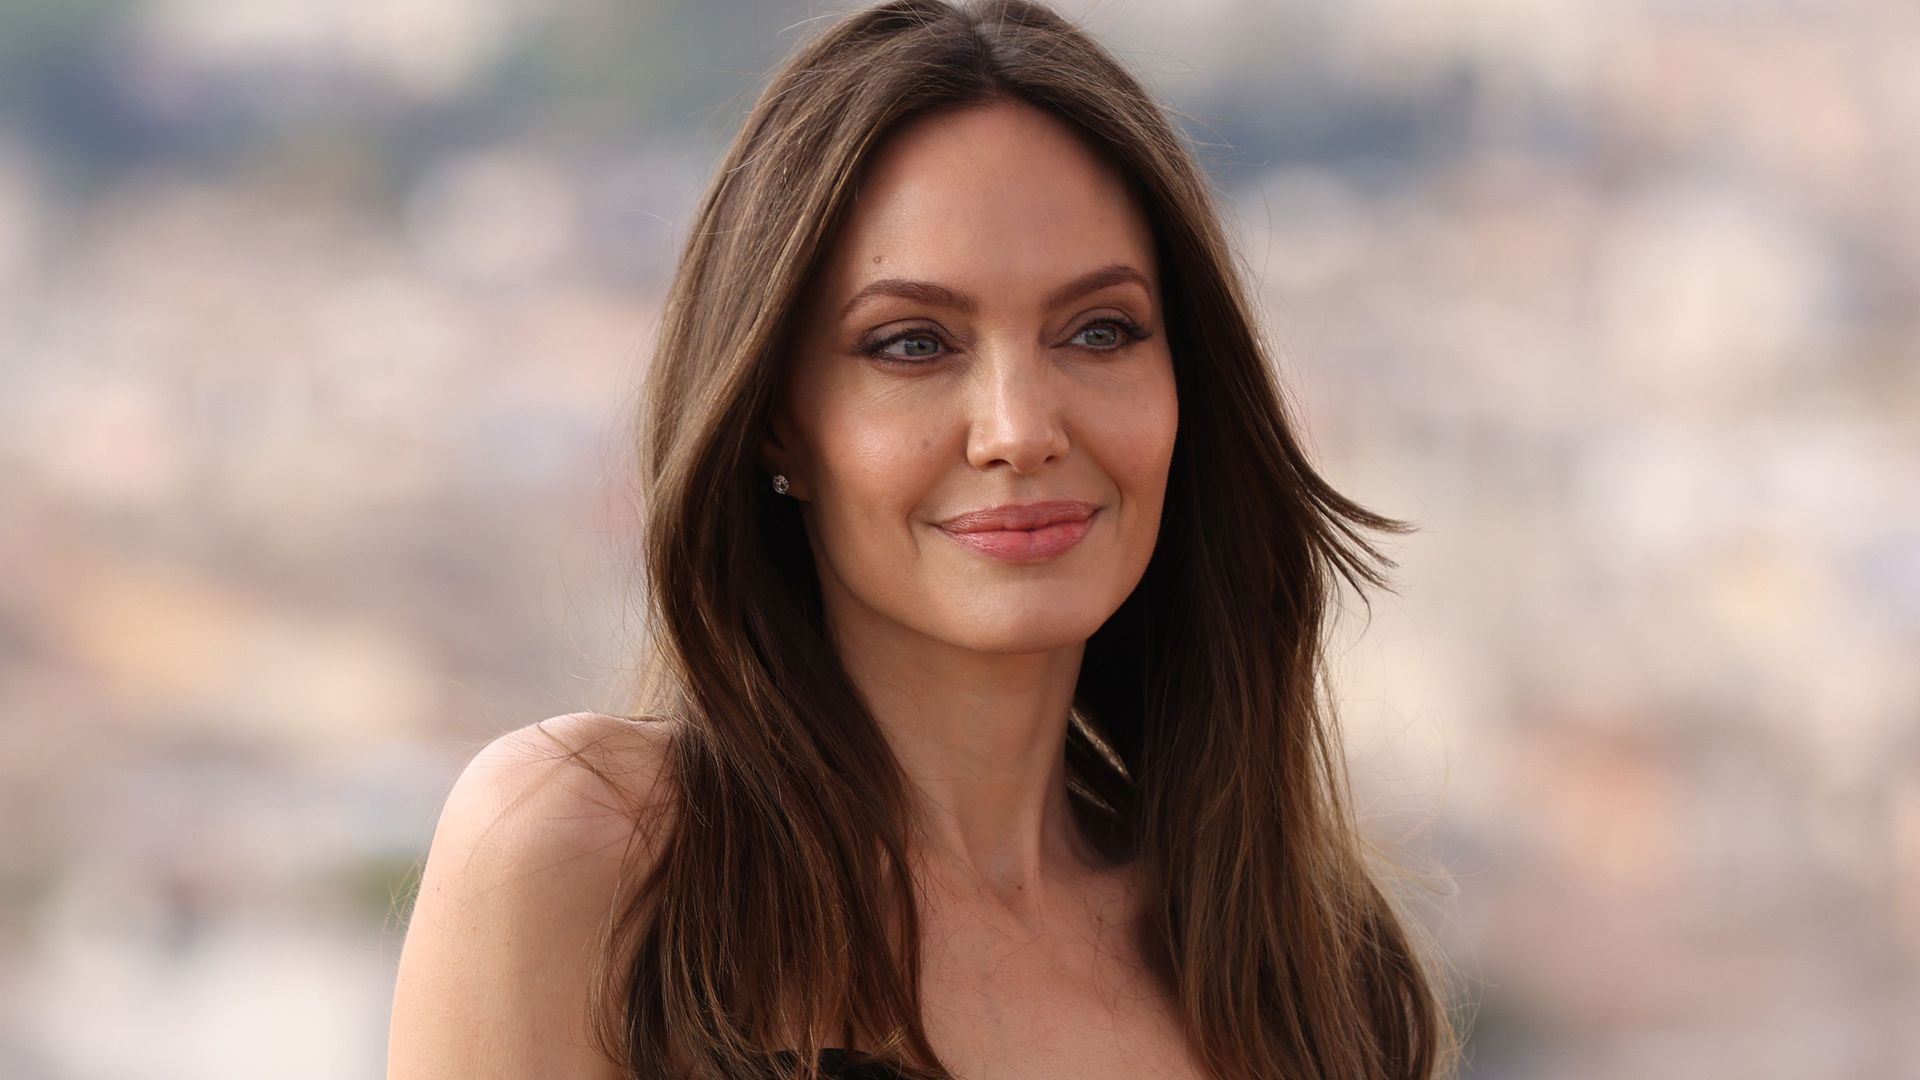 Angelina Jolie’s unexpected buzzcut throwback just blew our minds